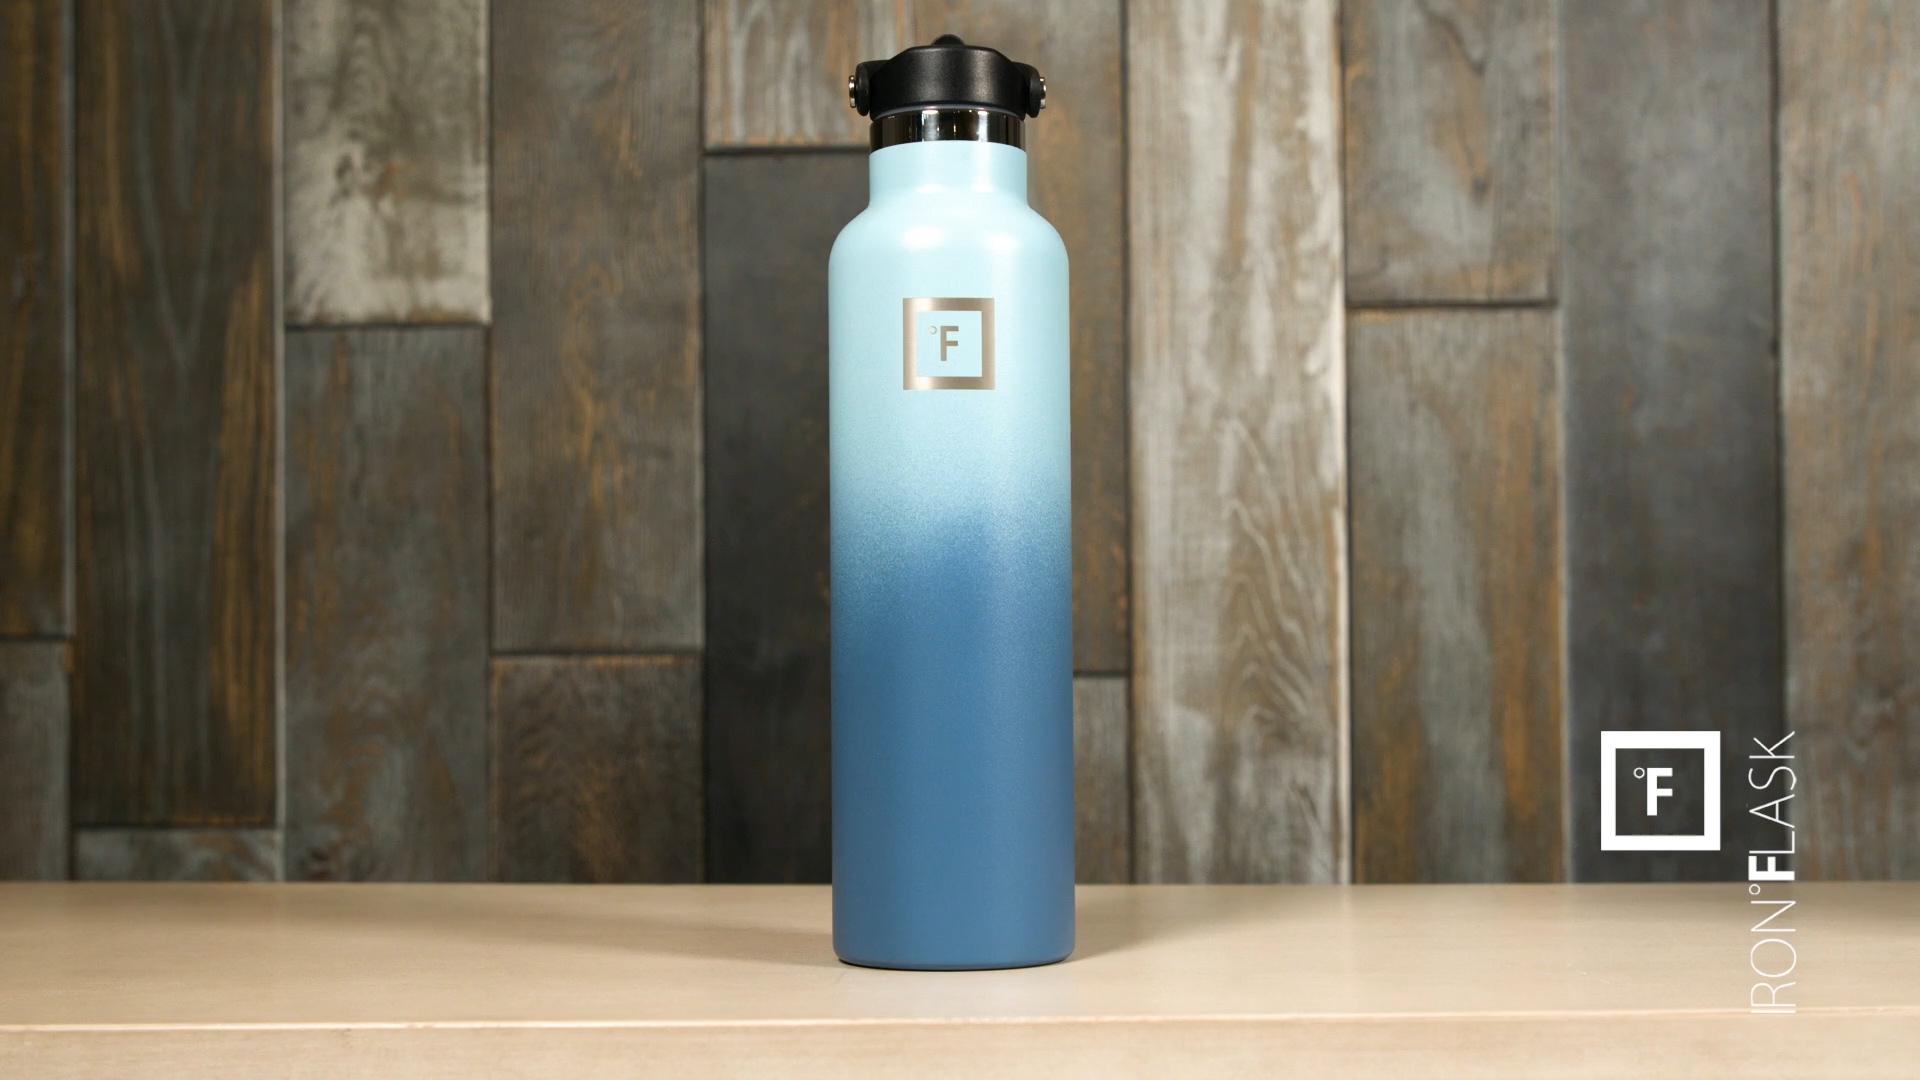 Best Water Bottle 2021 - Iron Flask Review 